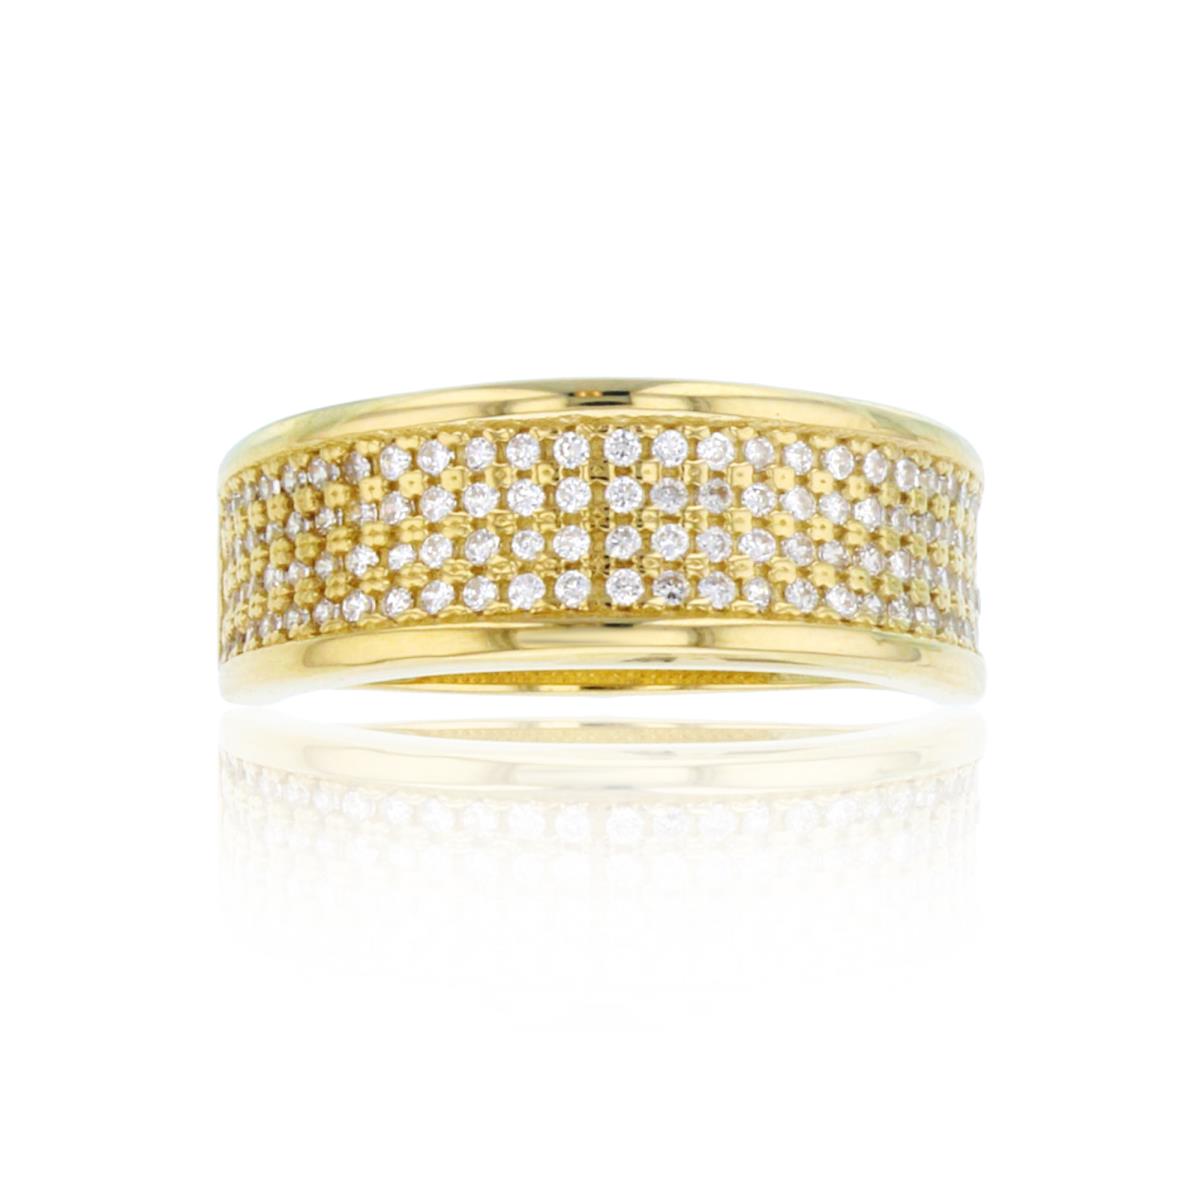 14K Yellow Gold 7.70mm Wide Micropave Concave Fashion Ring